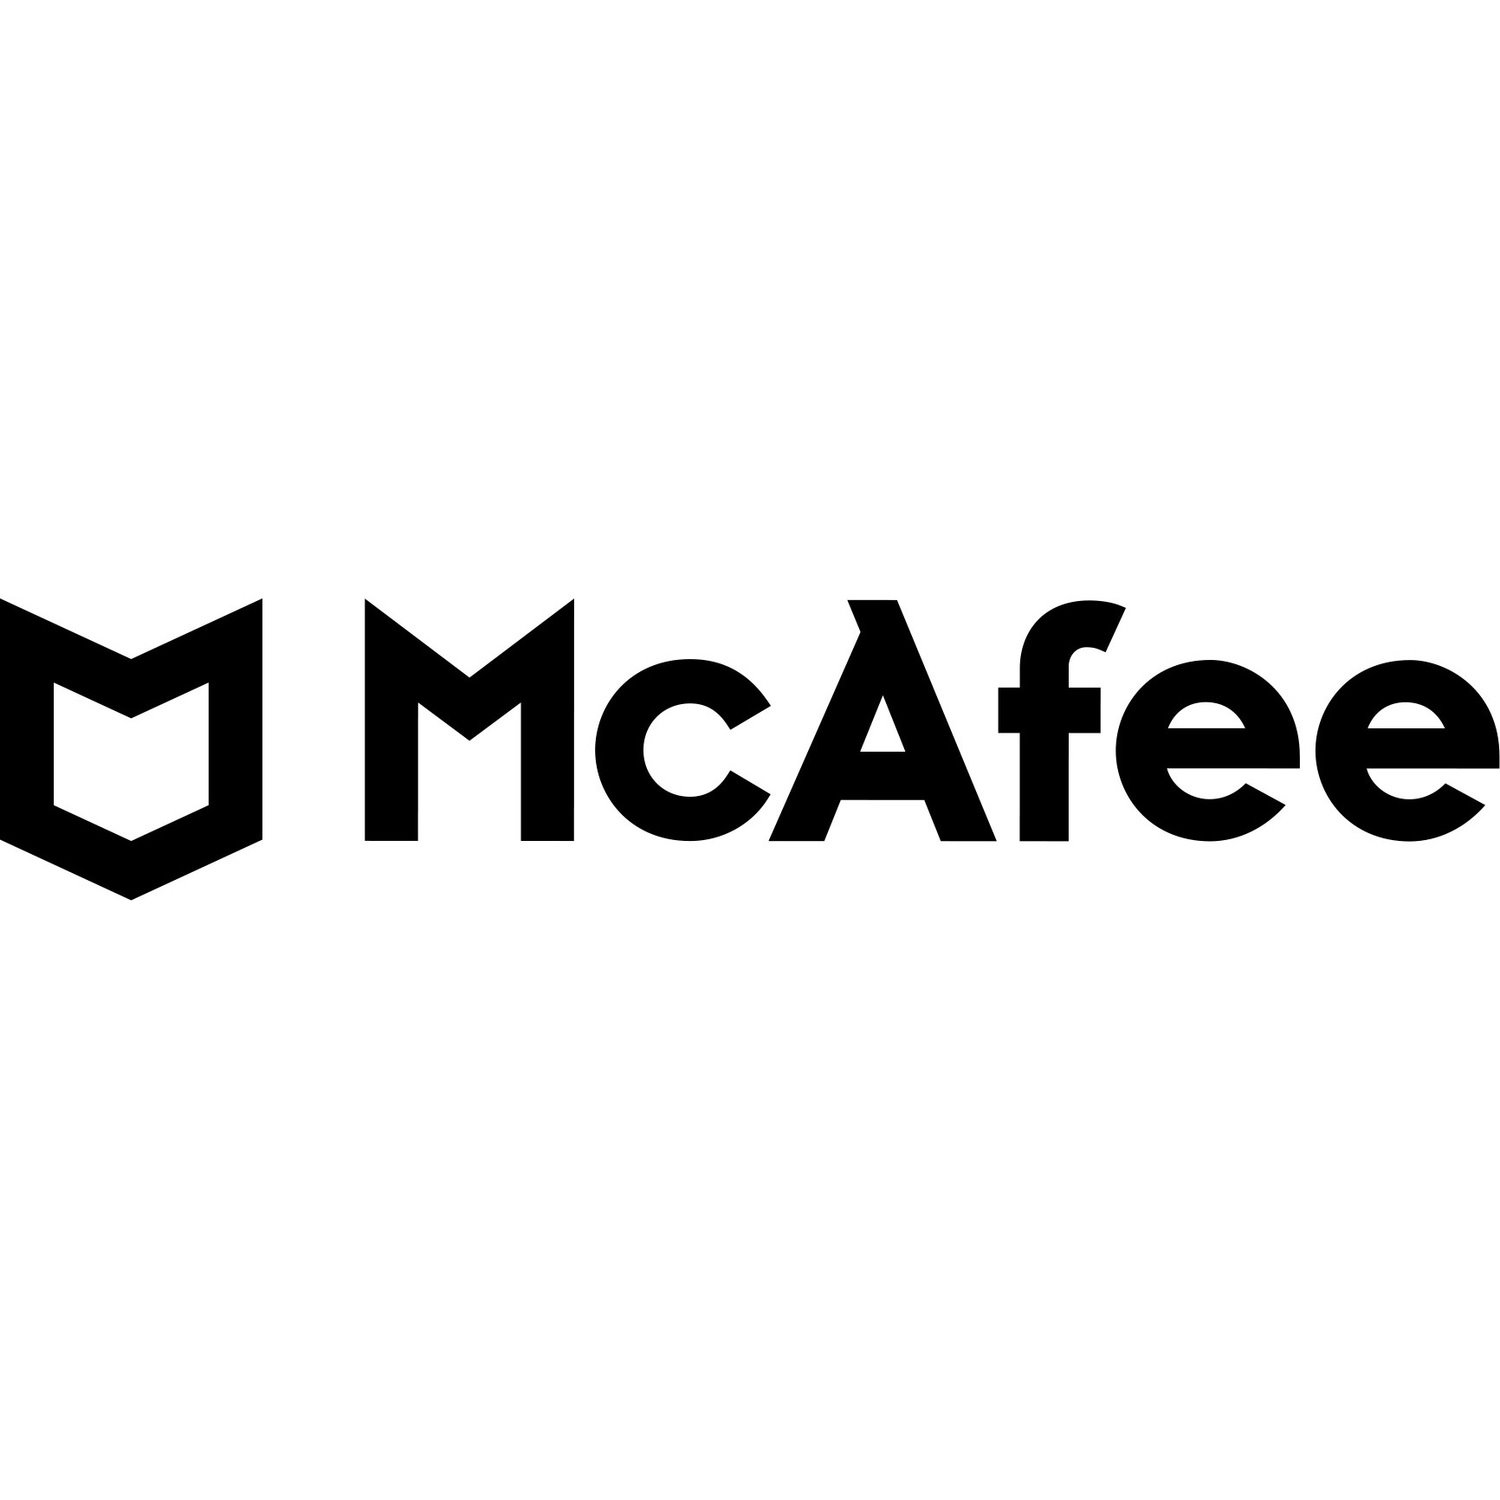 McAfee Gold Software Support - 1 Year - Service